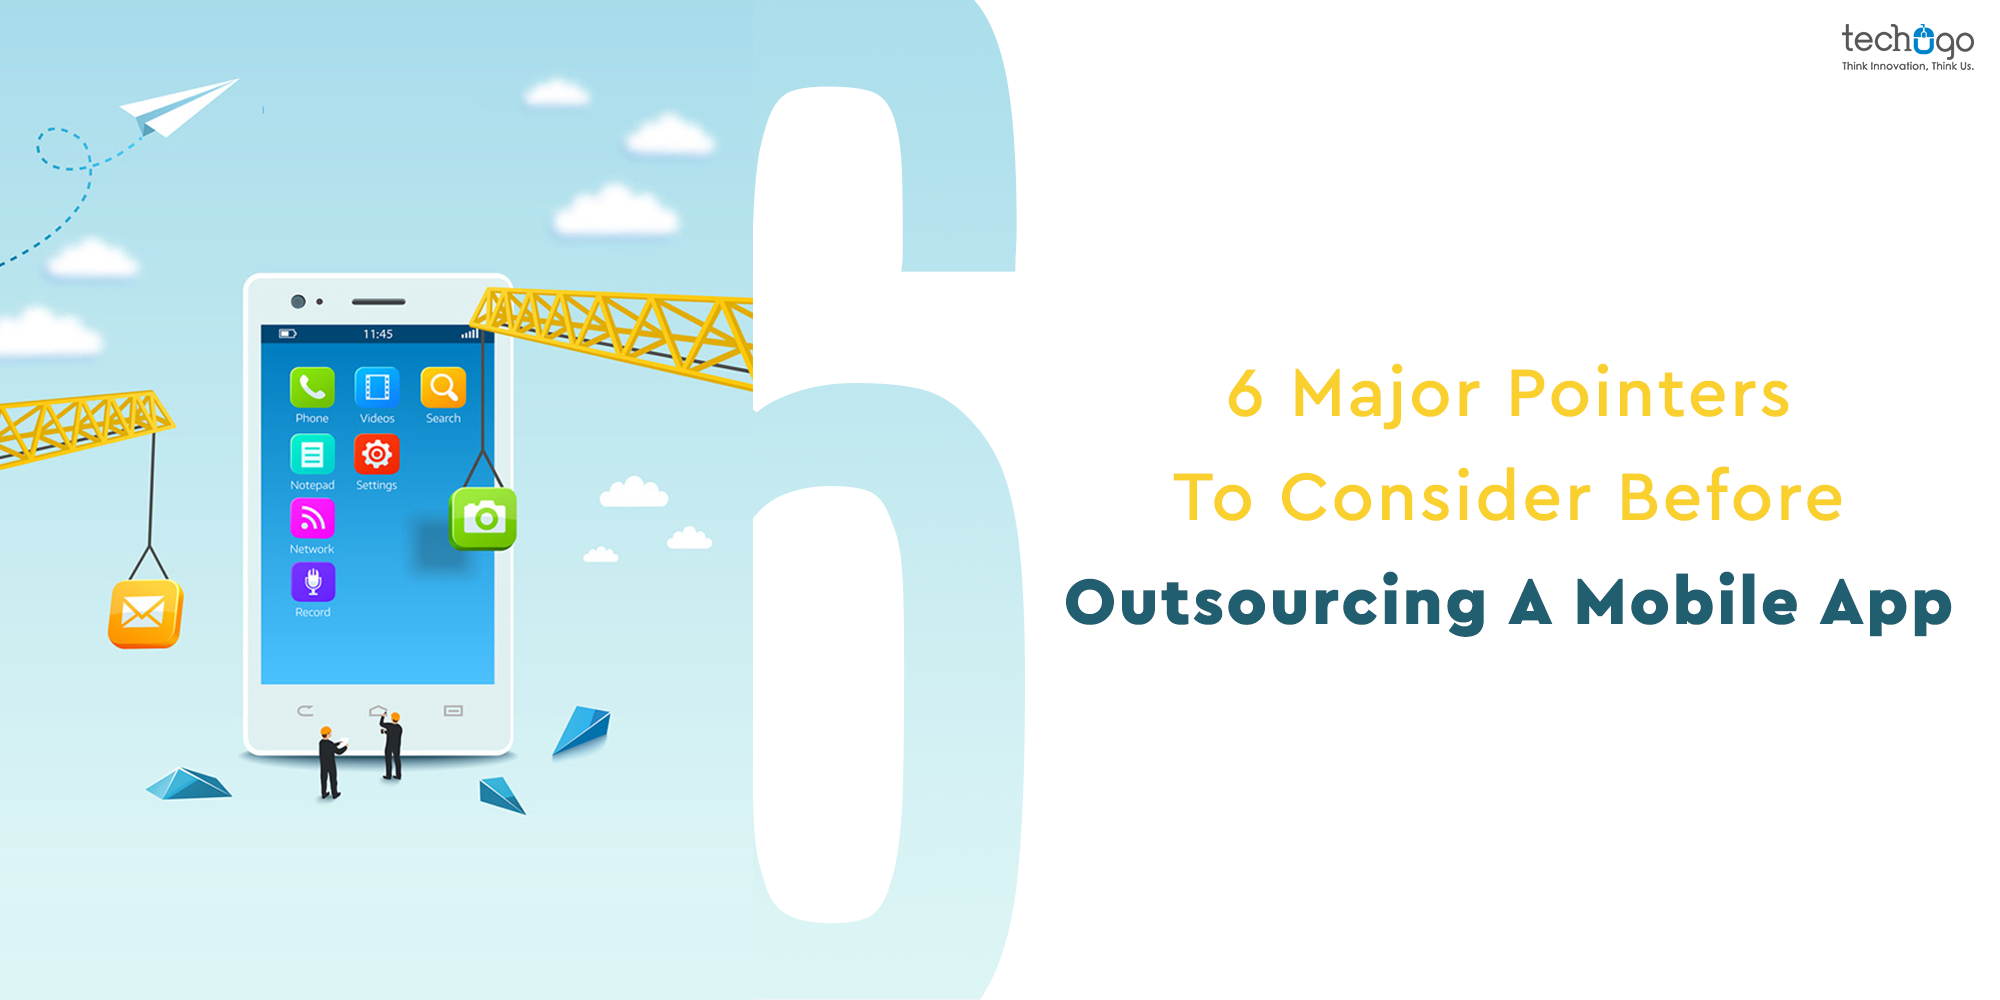 Outsourcing Your Mobile Application Development? 6 Points To Consider